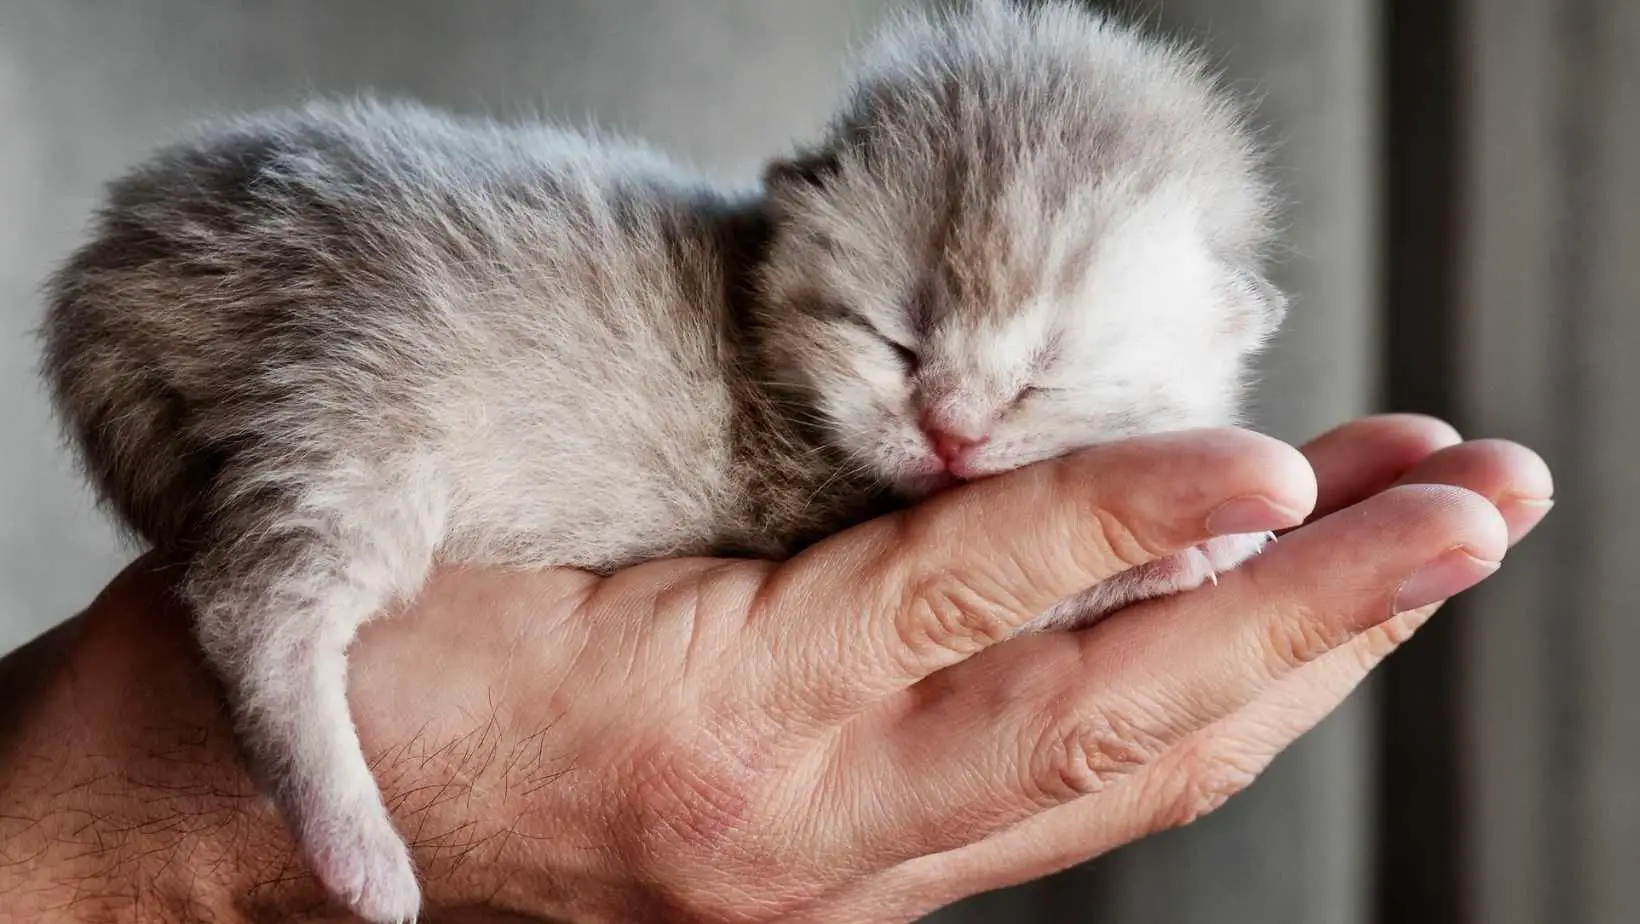 How to Take Care of a Baby Cat?/When Do Baby Cats Open Their Eyes?